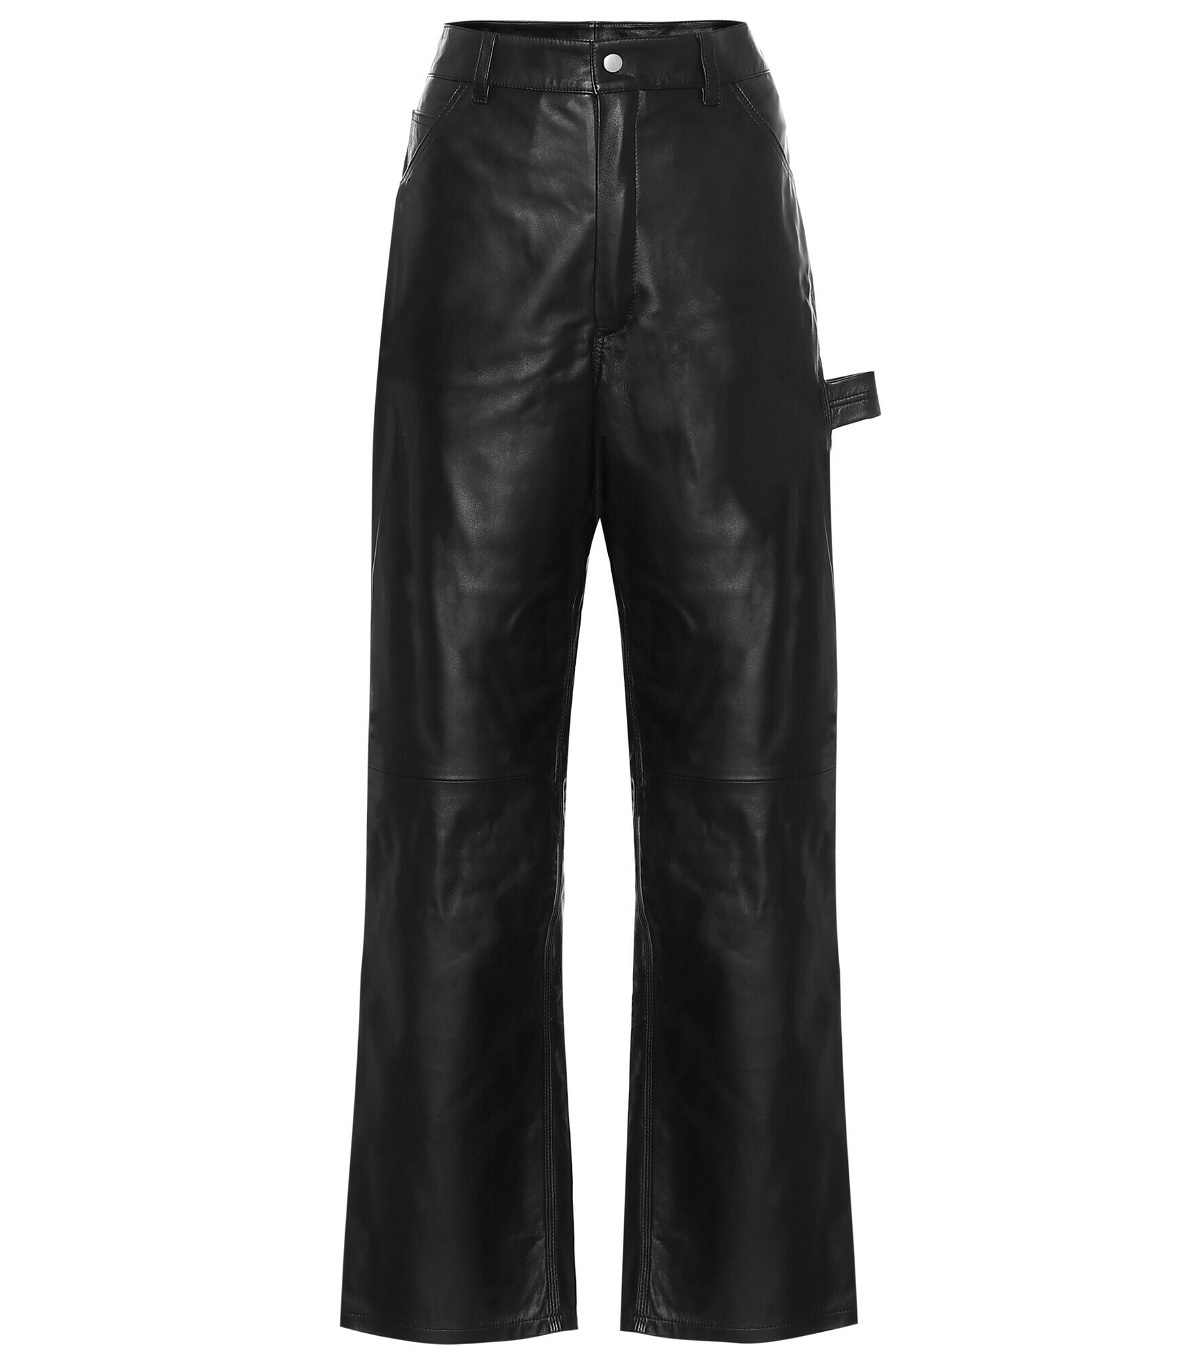 Unravel - High-rise wide-leg leather jeans Unravel